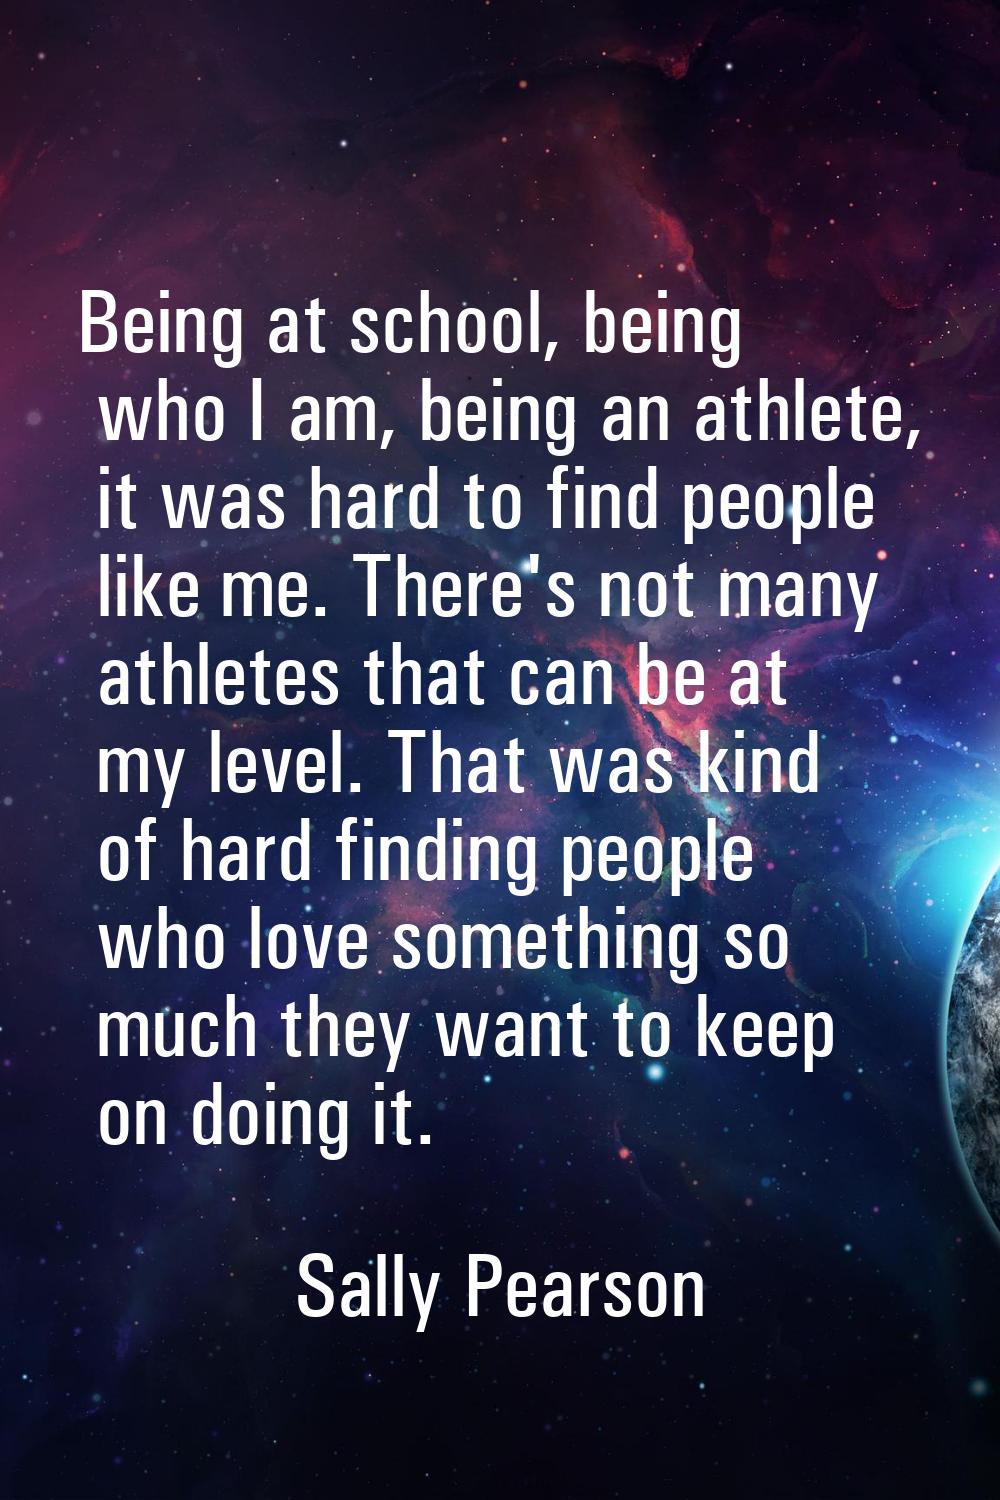 Being at school, being who I am, being an athlete, it was hard to find people like me. There's not 